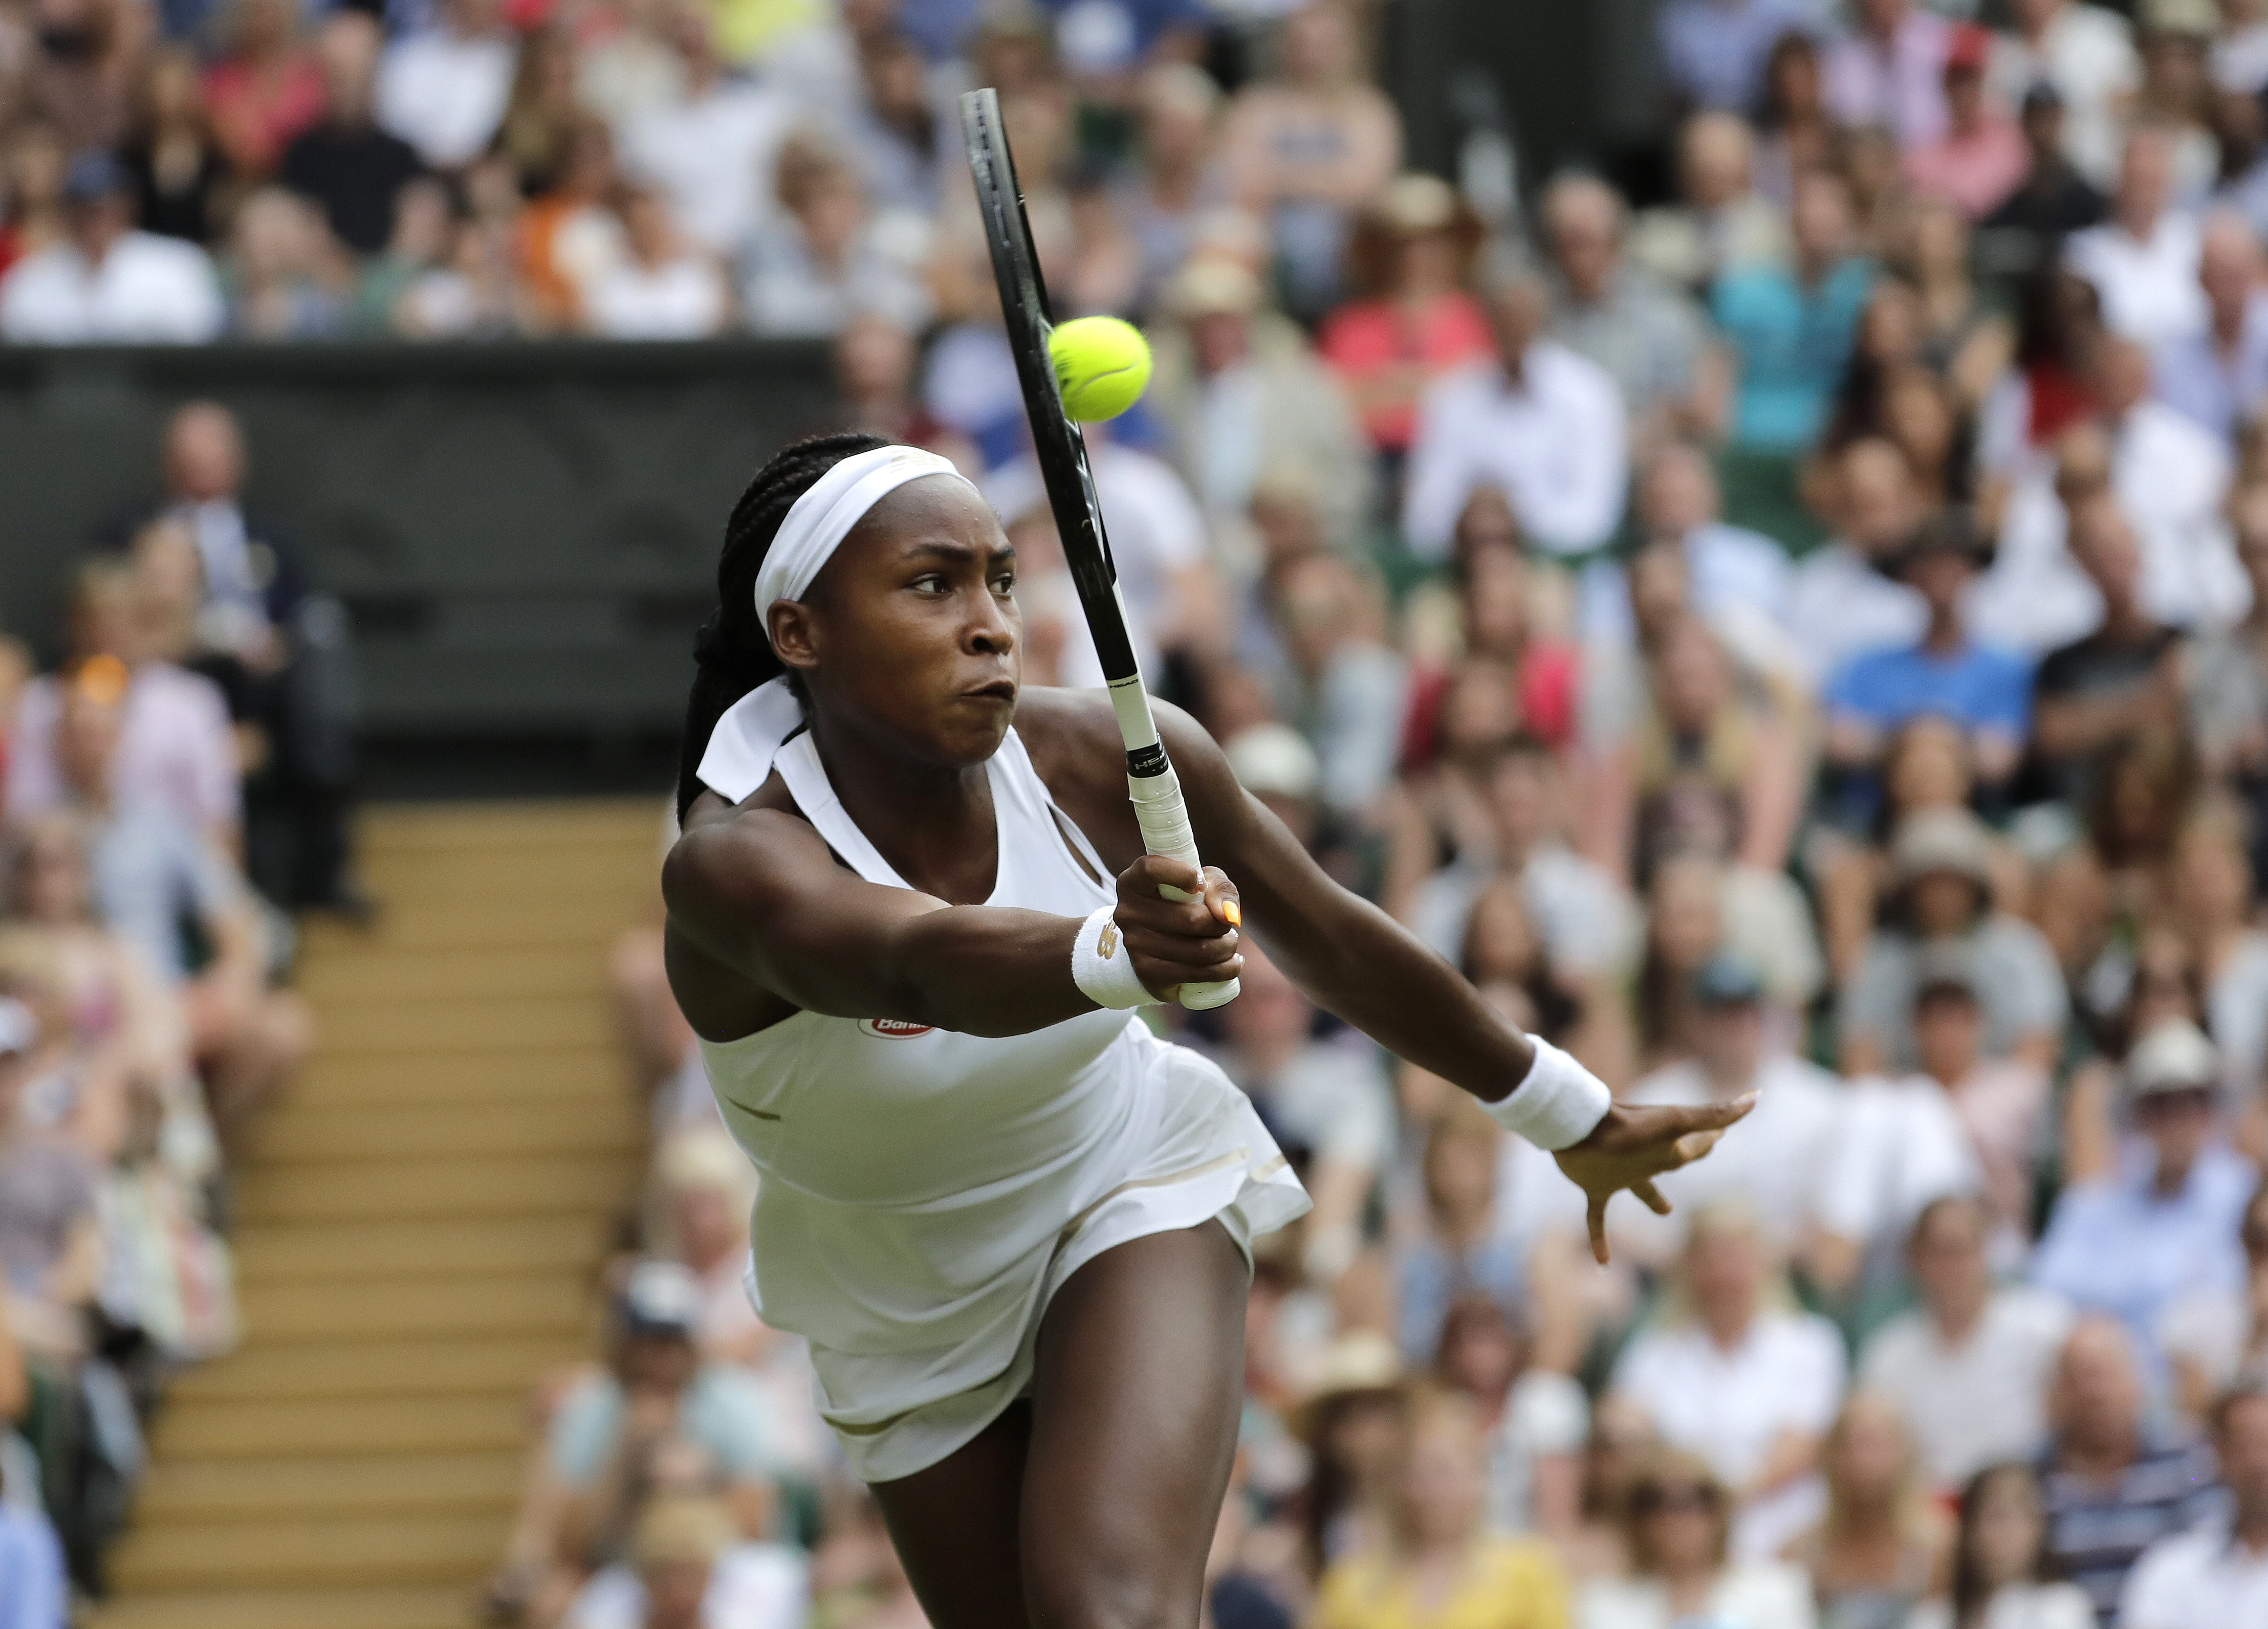 Wimbledon free live stream (7/1/21) How to watch Roger Federer, Coco Gauff, time, channel